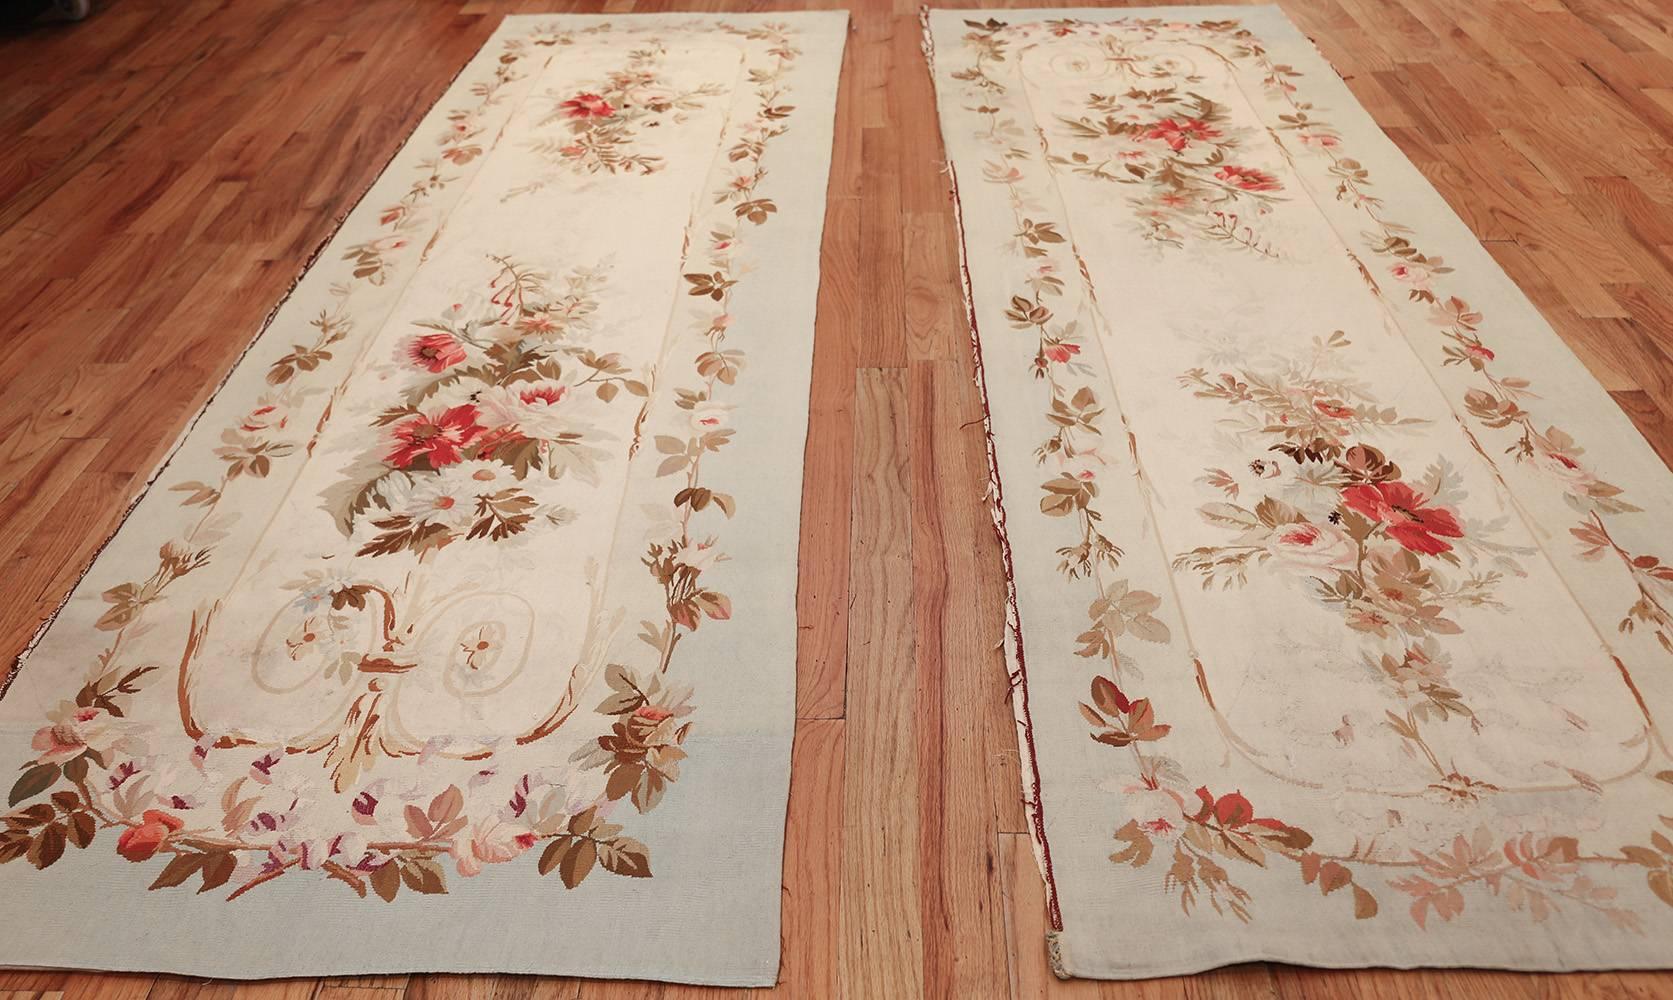 Pair of Antique French Aubusson Rugs. Size: 3 ft 2 in x 10 ft 9 in Each 2